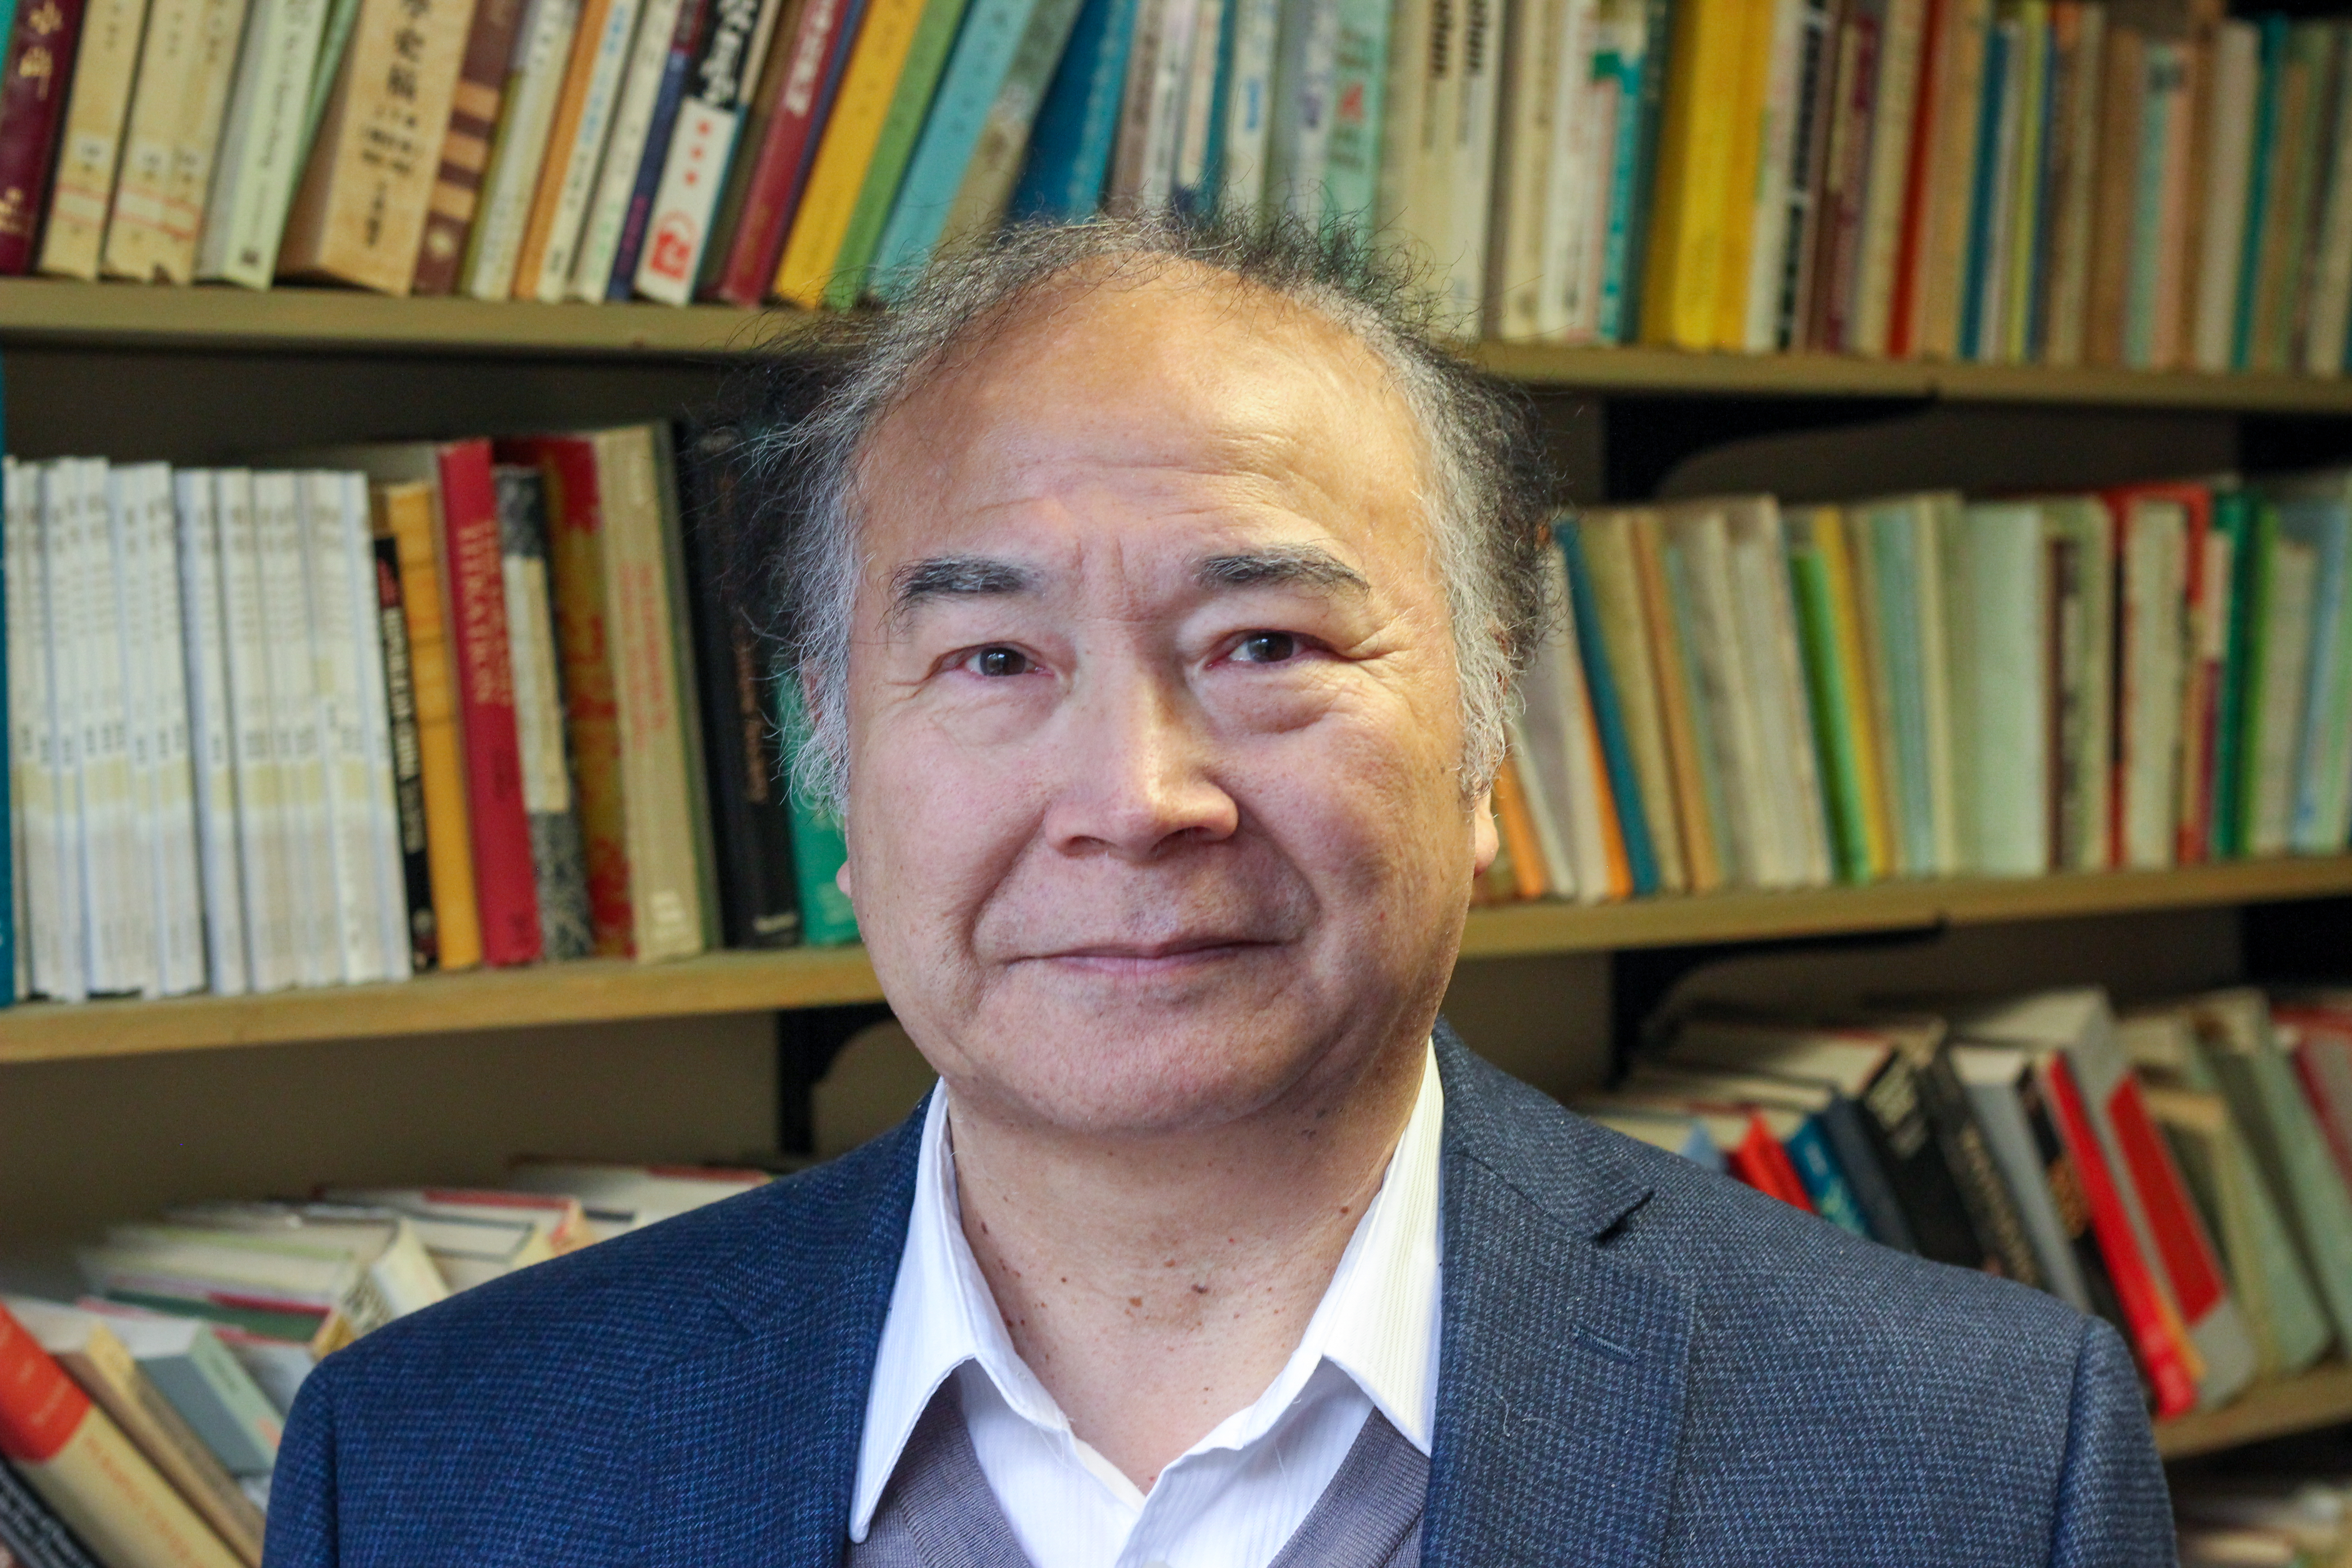 A headshot of Zhongping Chen, a Chinese man with grey-and-black hair wearing a blue blazer, grey sweater and white collared shirt, in front of a full bookcase.